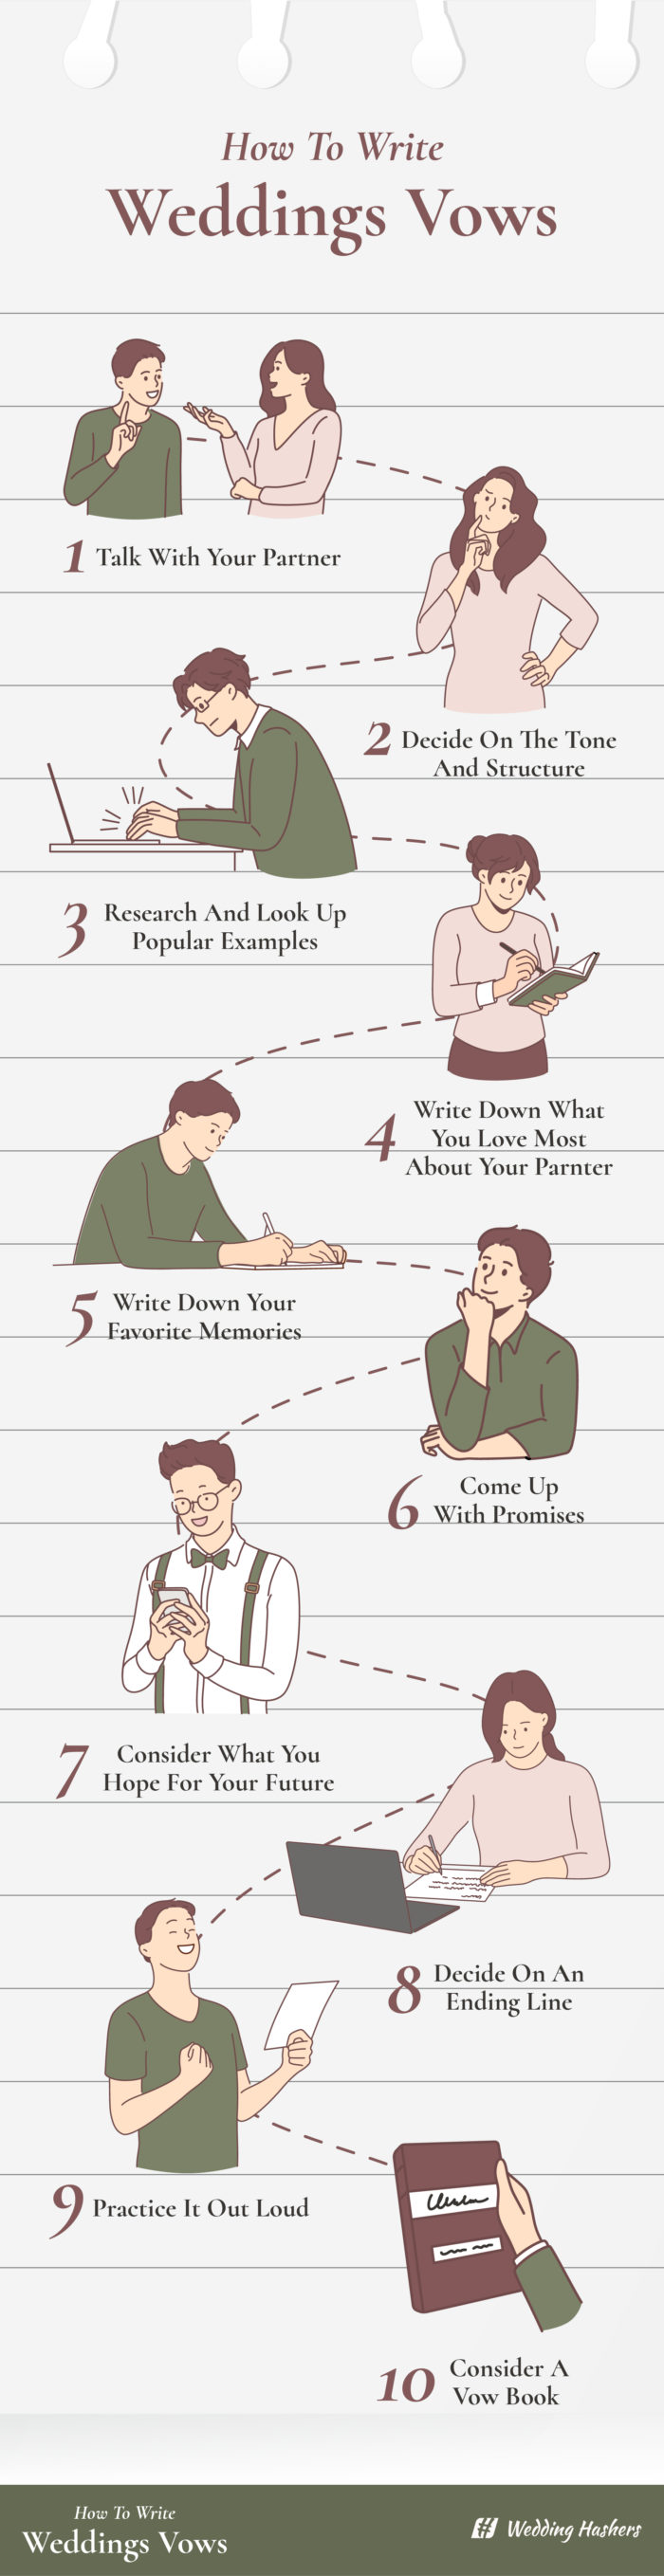 Wedding Vows: How To Write Them Plus 33 Examples